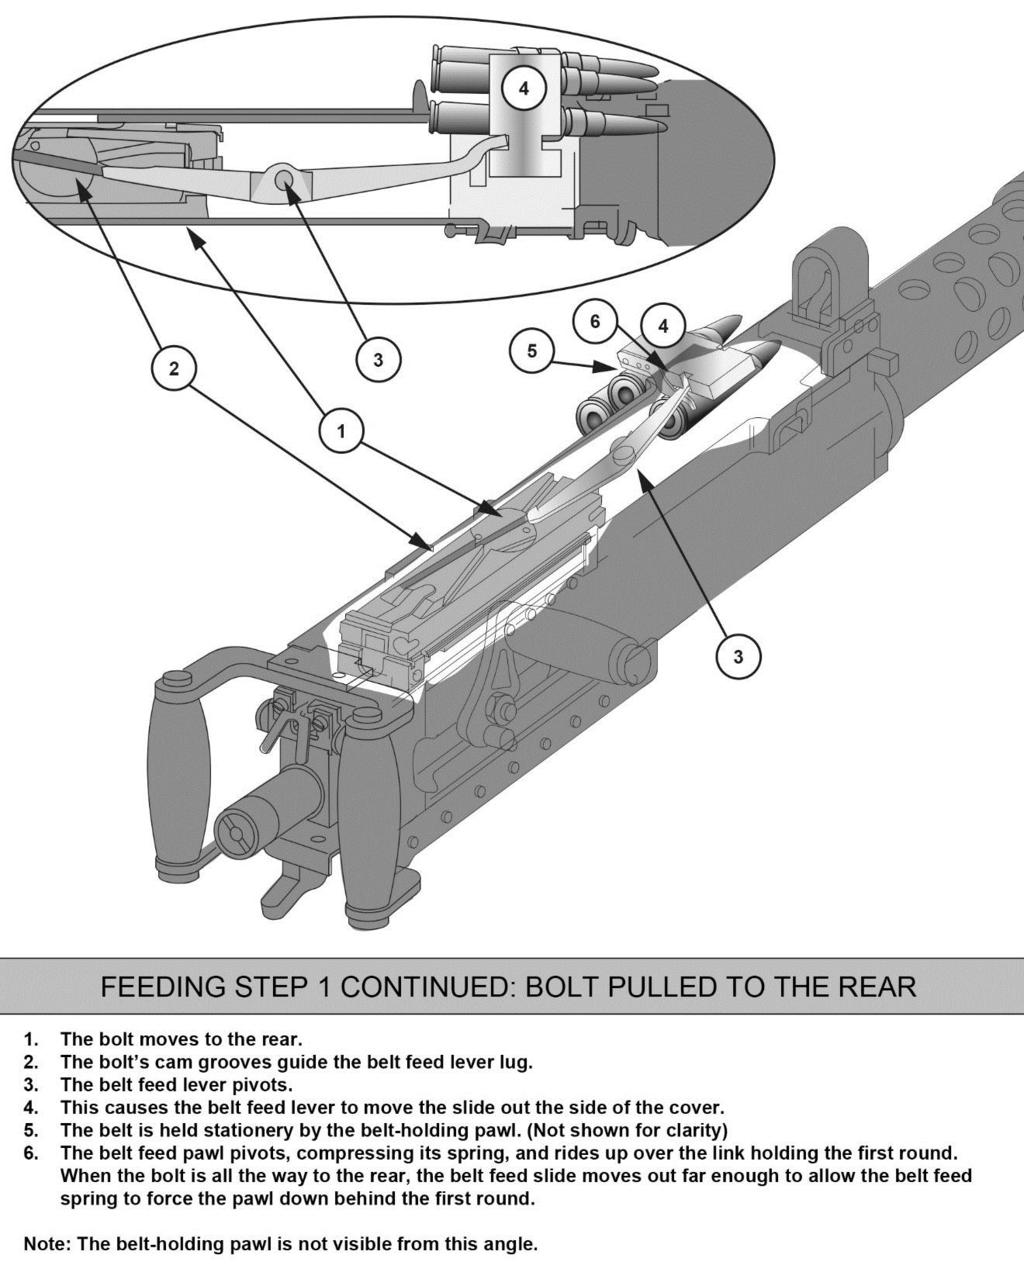 Chapter 2 2-14. As the bolt moves to the rear, its cam grooves guide the belt feed lever lug, pivoting the lever and moving the slide out the side of the cover.